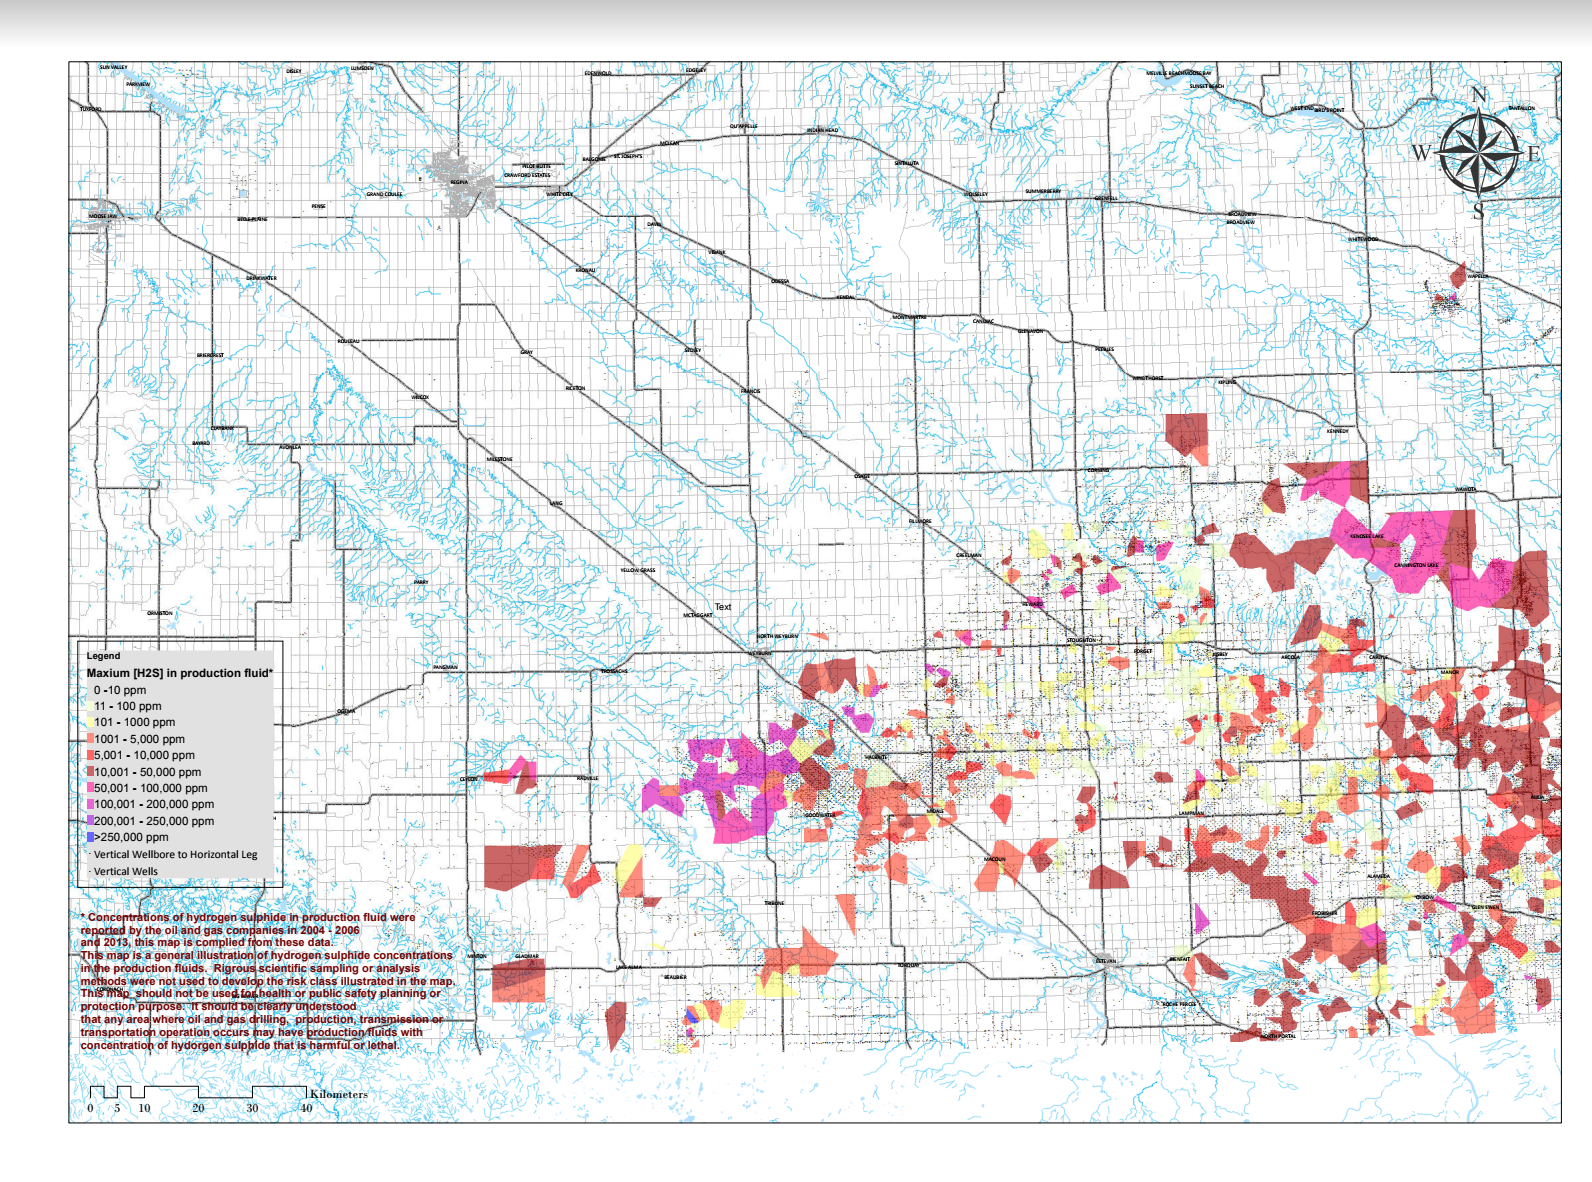 Saskatchewan, critical sour gas locations, Ministry of the Economy, The Price of Oil